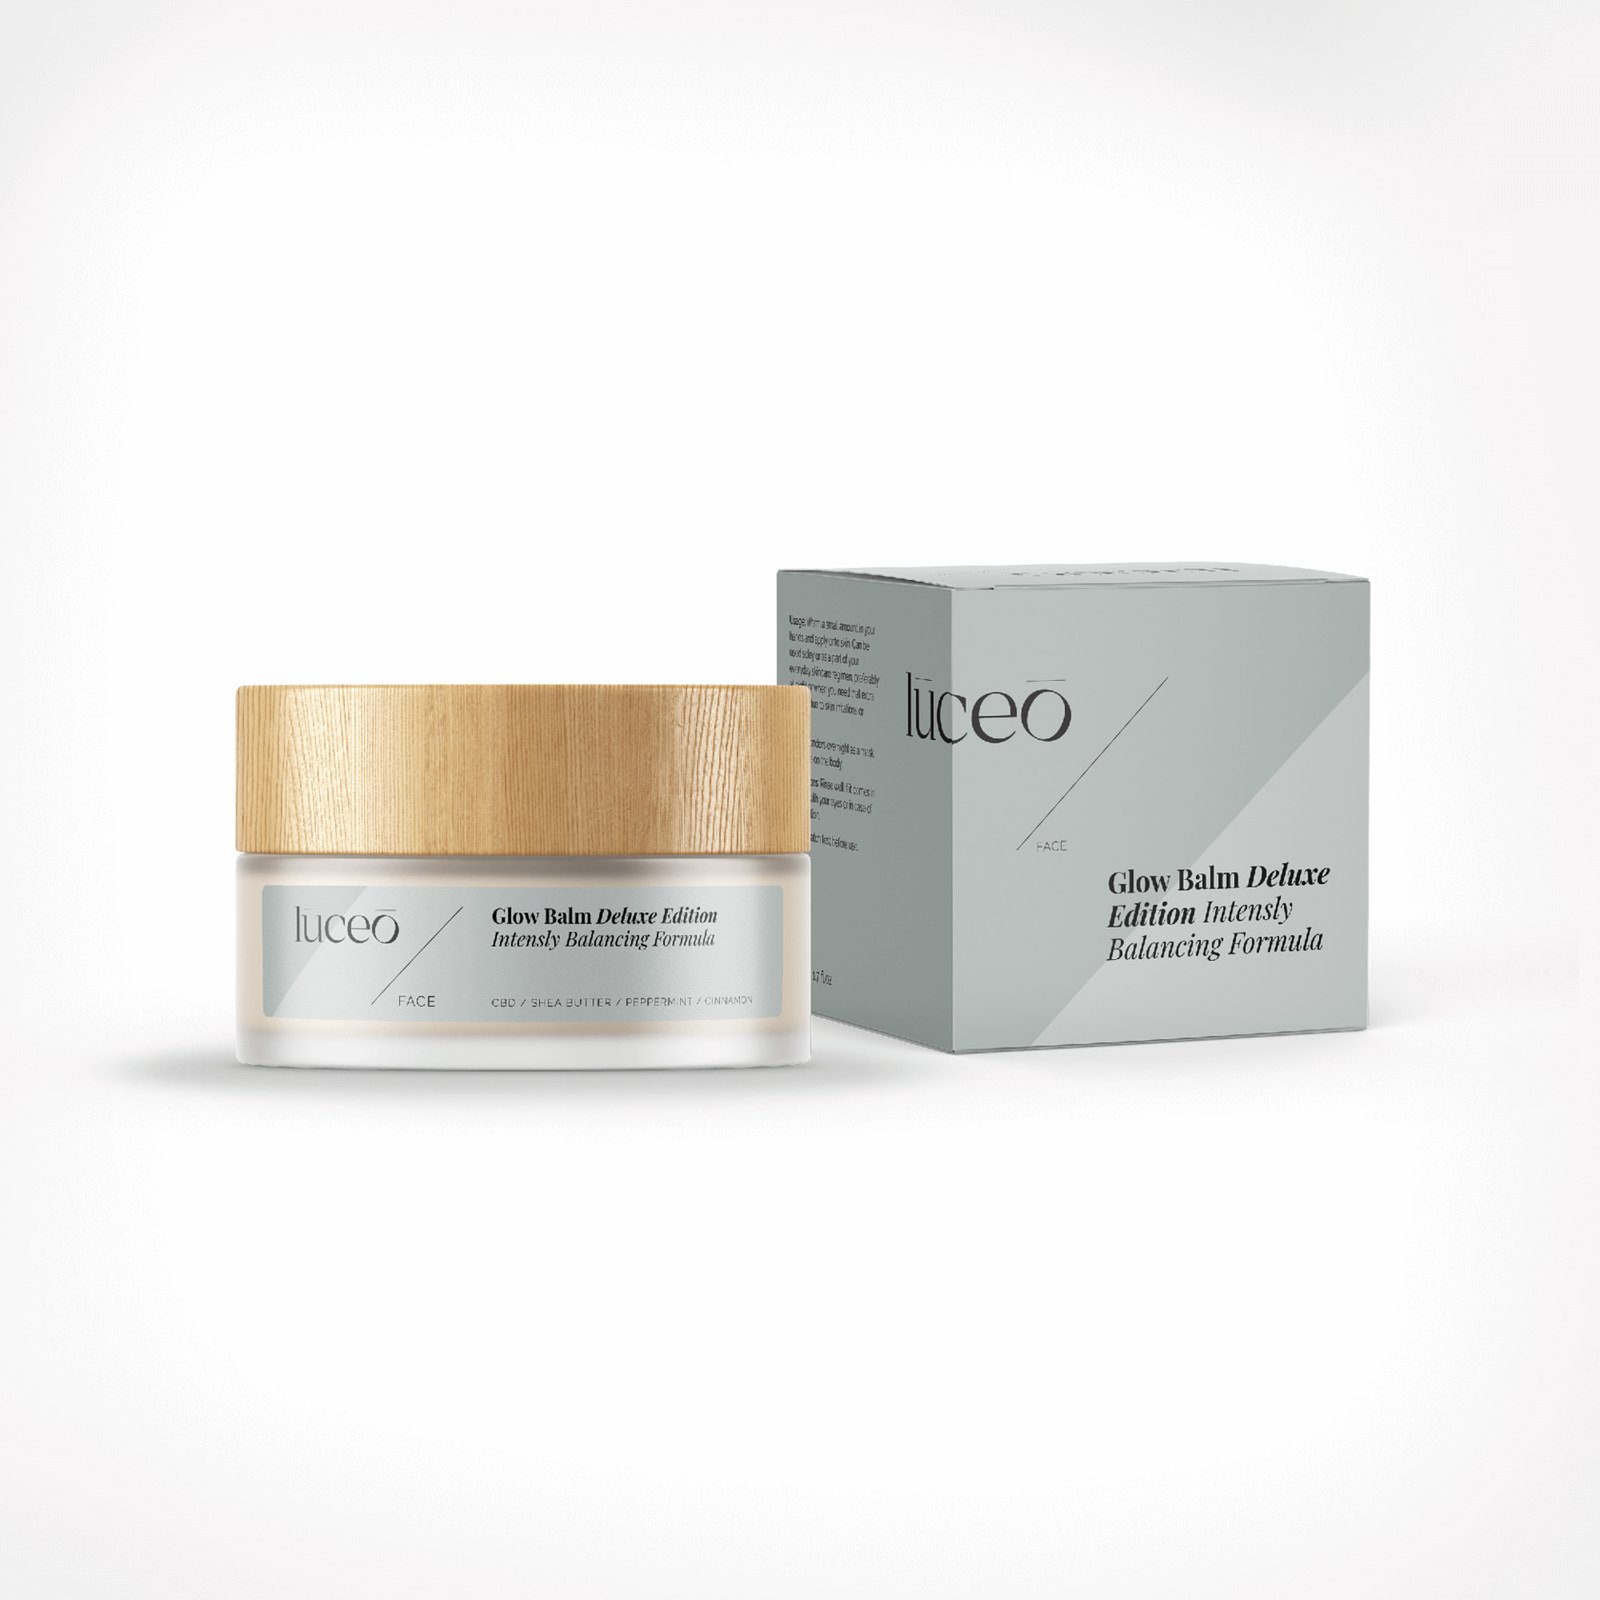 LUCEO Glow Balm - Deluxe Edition Night Balm 50 ml